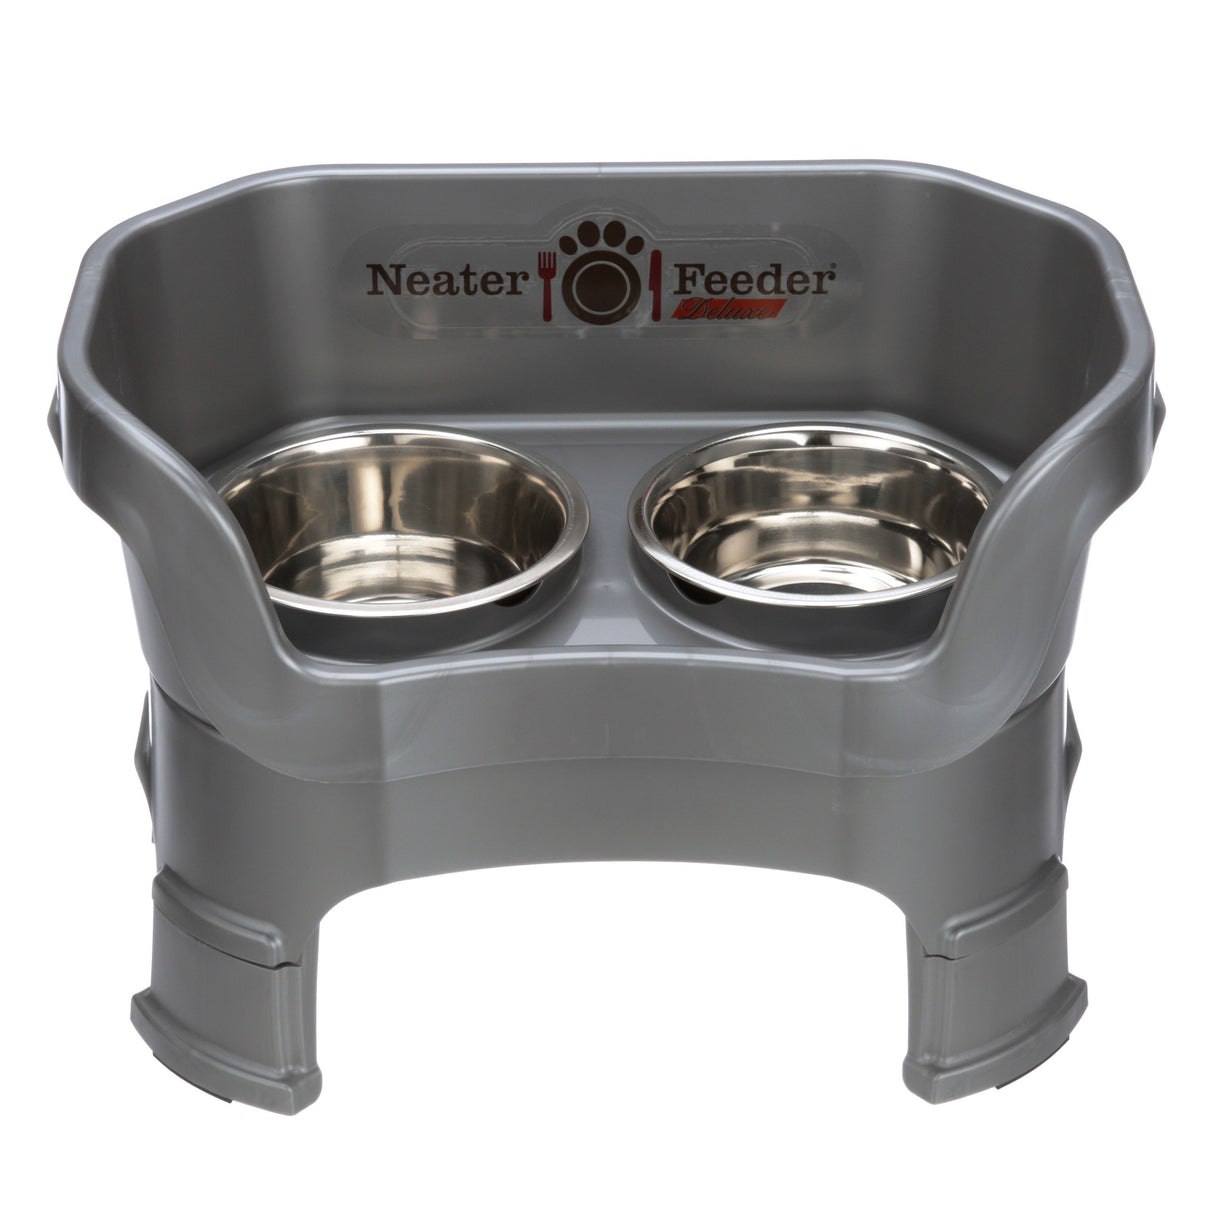 Neater Pets Big Bowl with Leg Extensions for Dogs - Raised for Feeding  Comfort - Extra Large Plastic Trough Style Food or Water Bowl for Use  Indoors